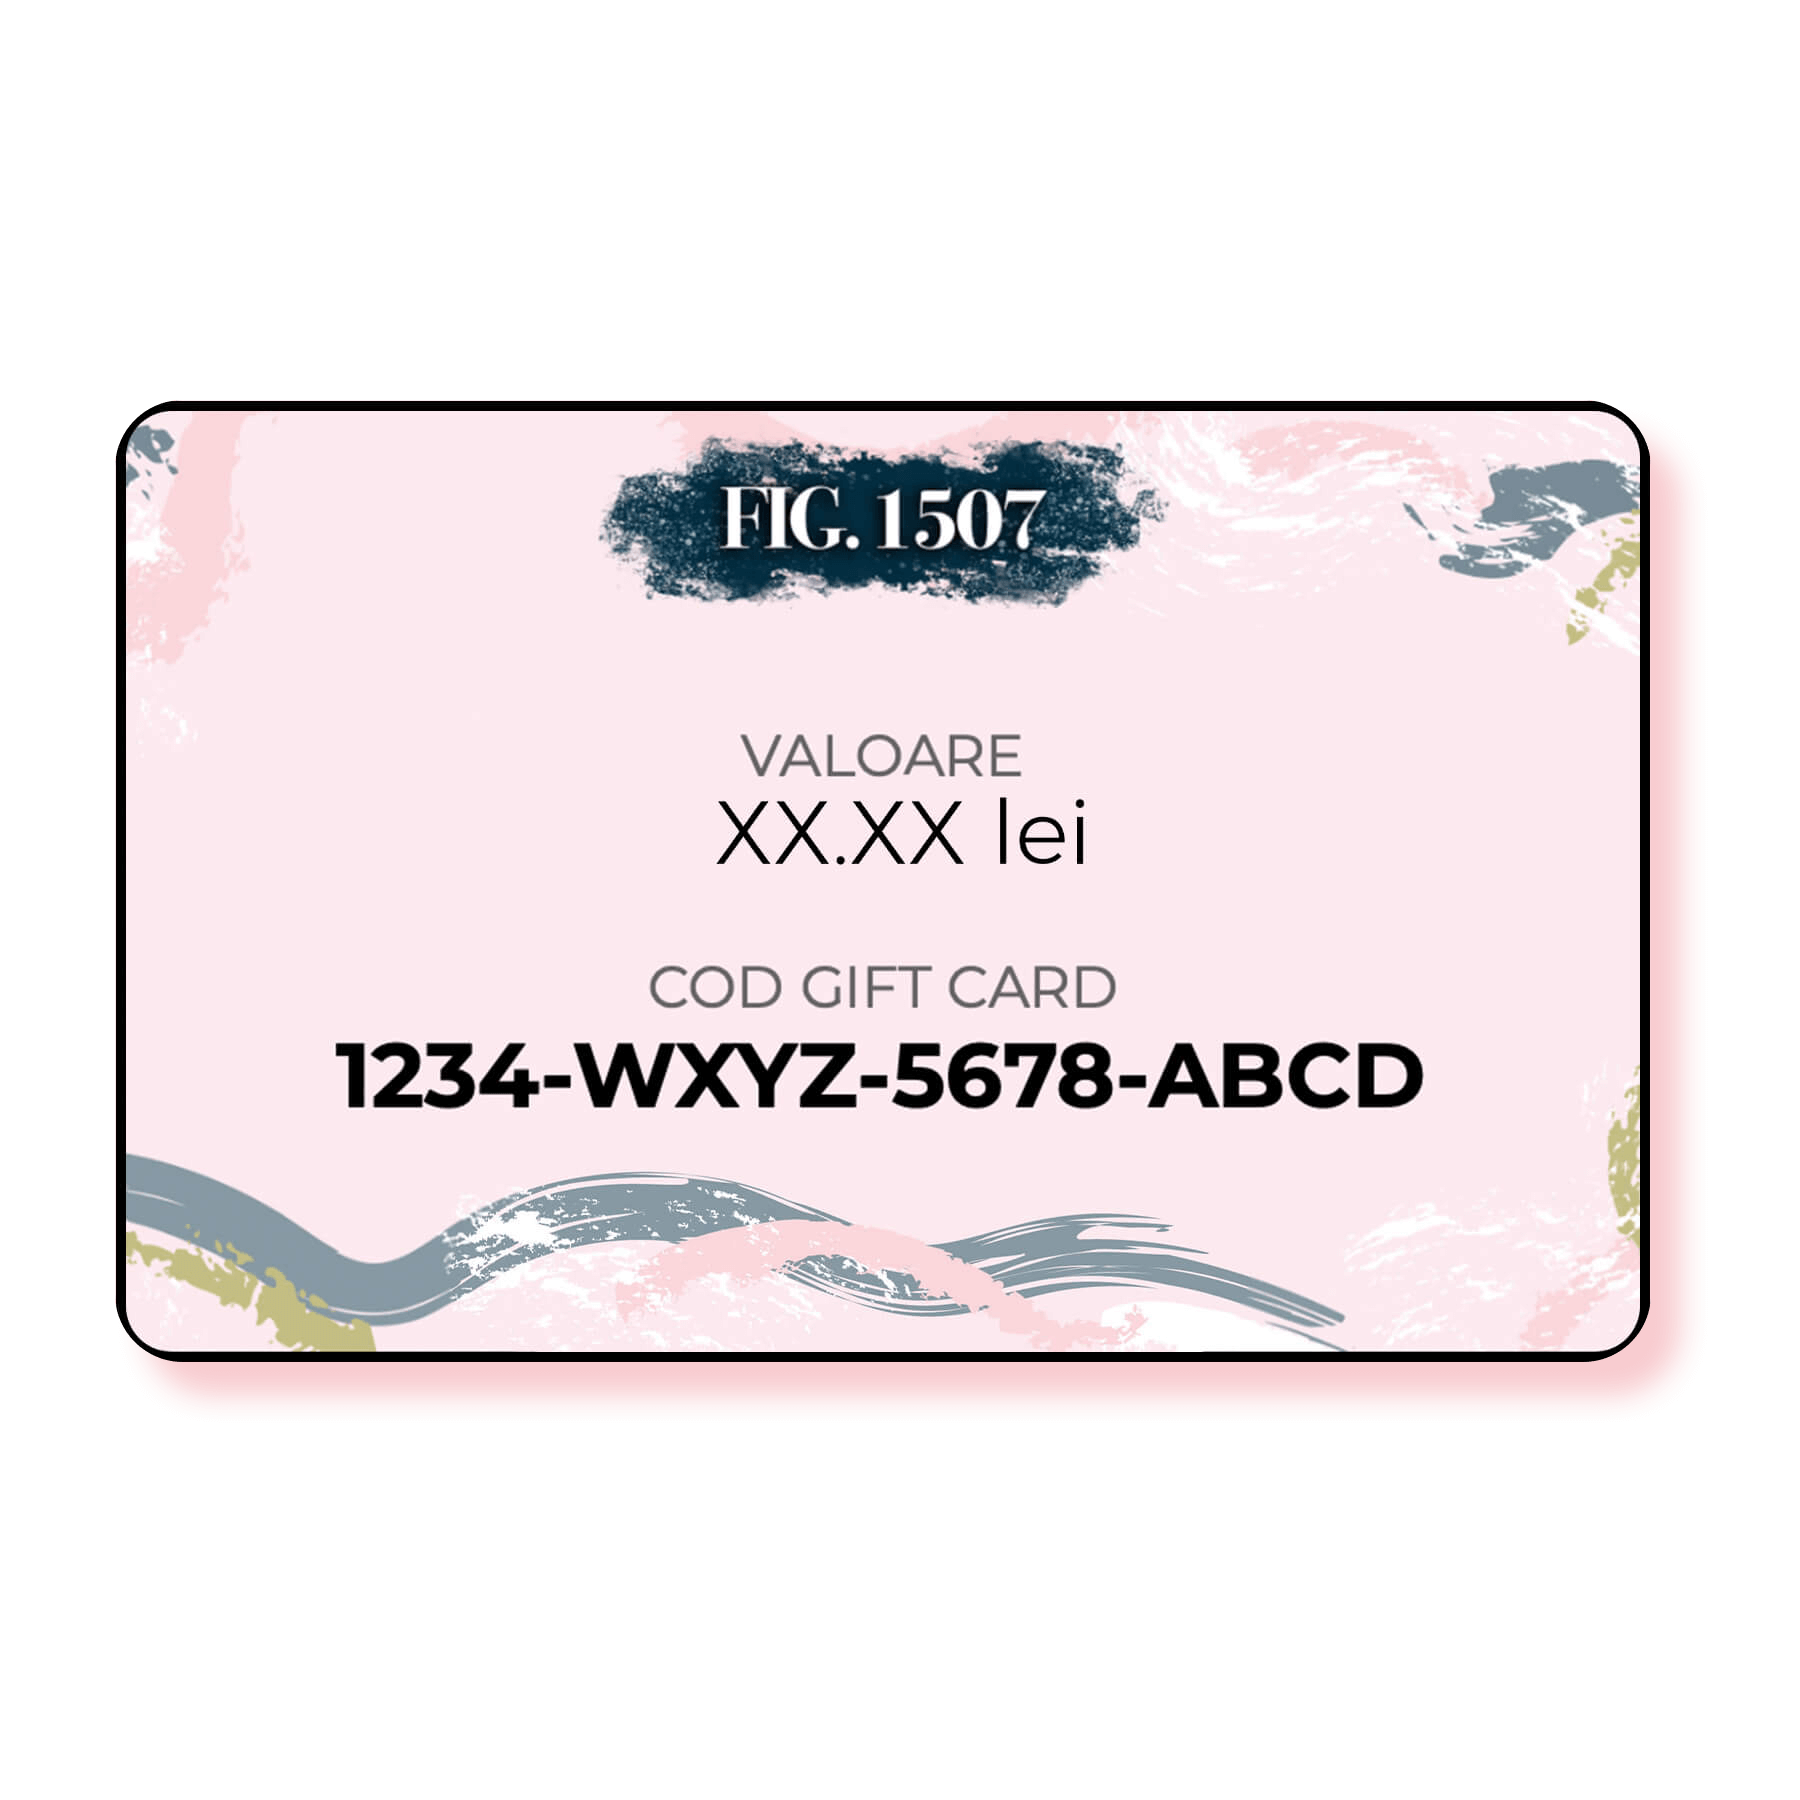 FIG 1507 GIFT CARD PRODUCT